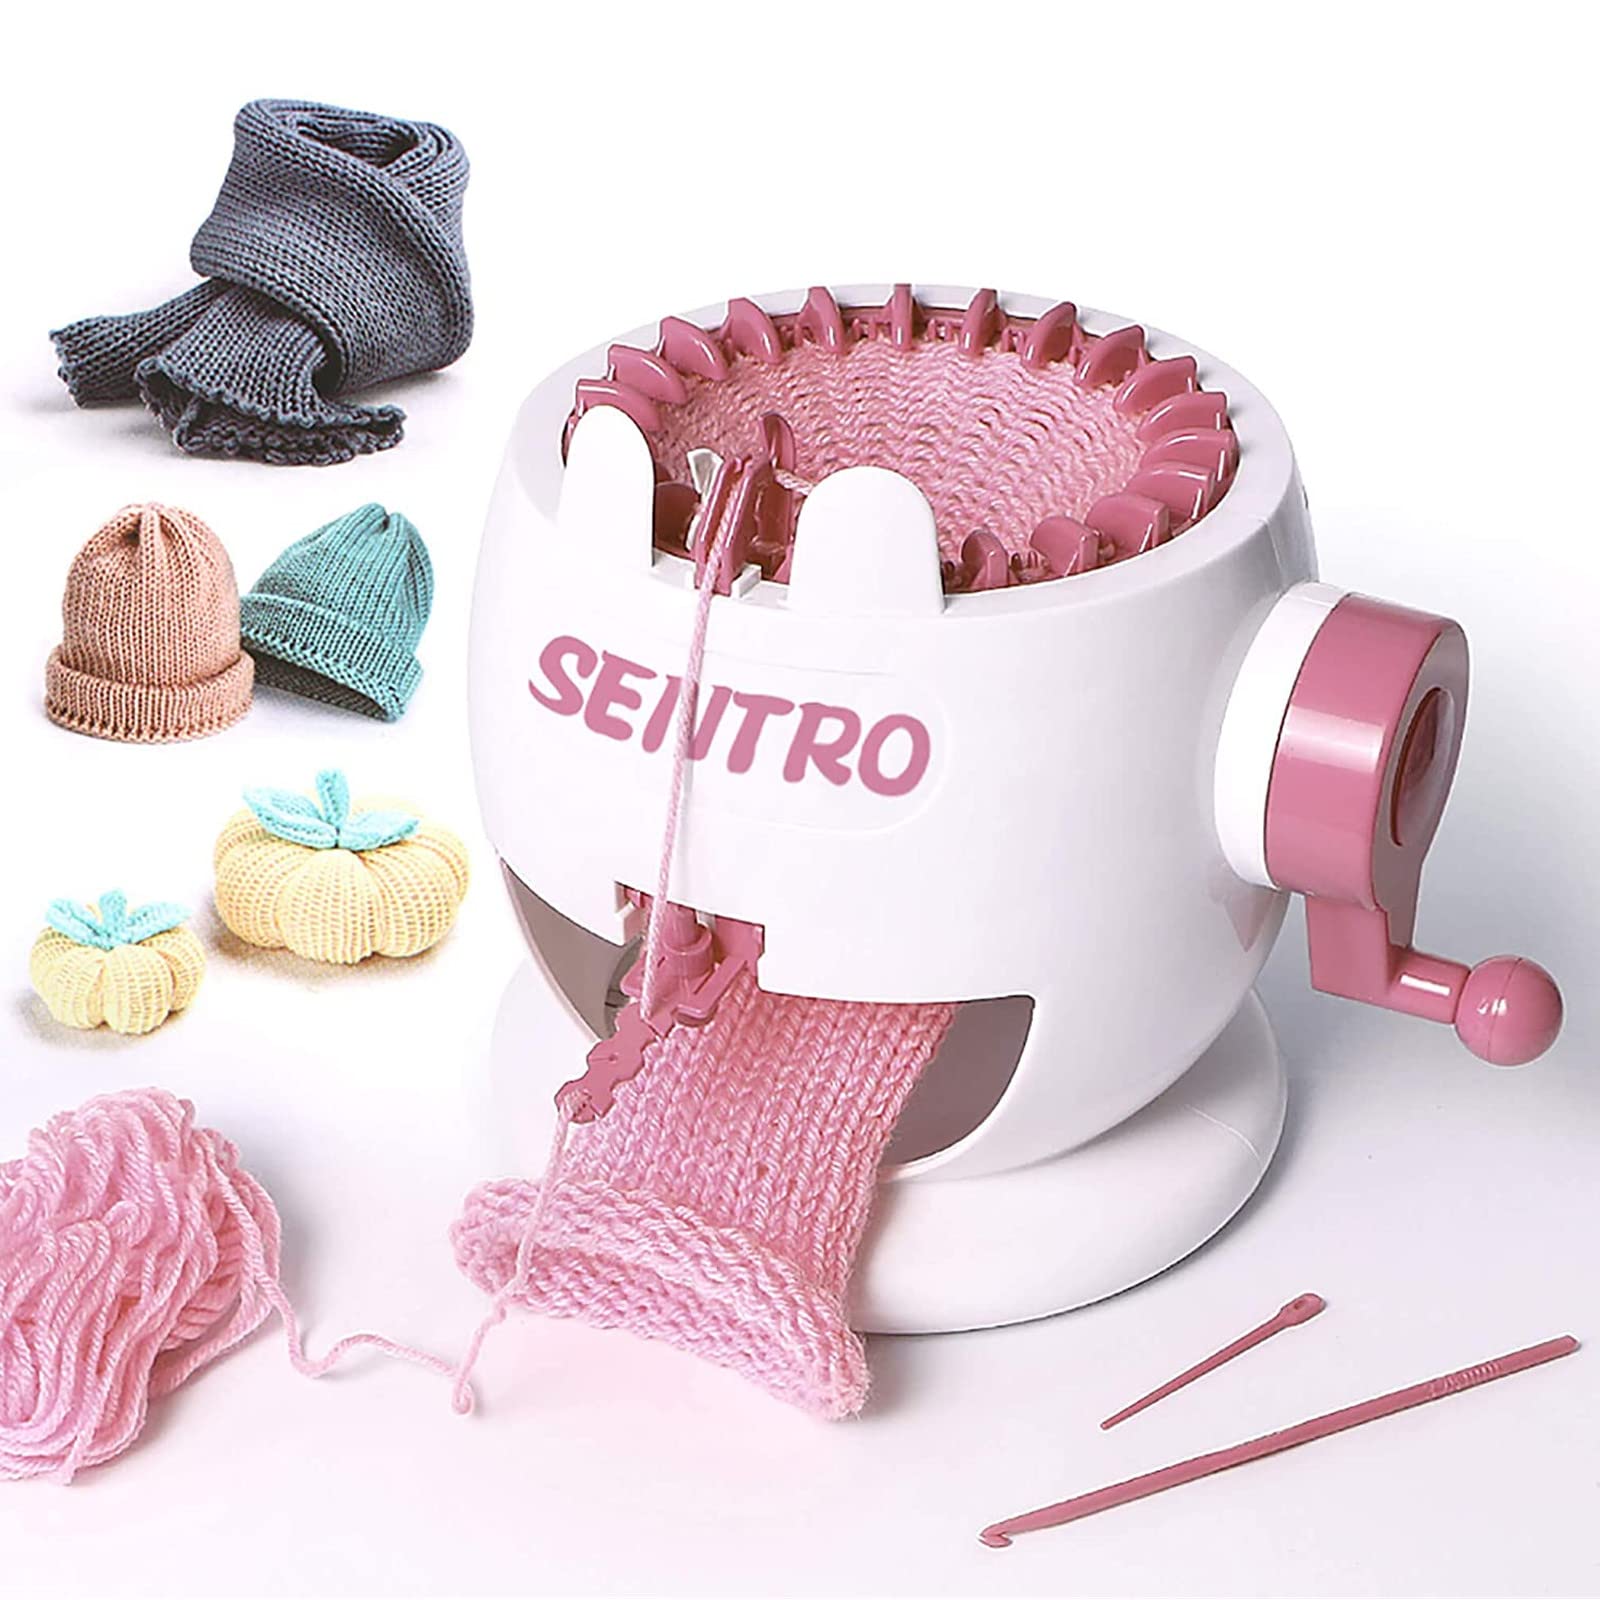 SENTRO Knitting Machine, Anyone have an issue with the row counter not  turning